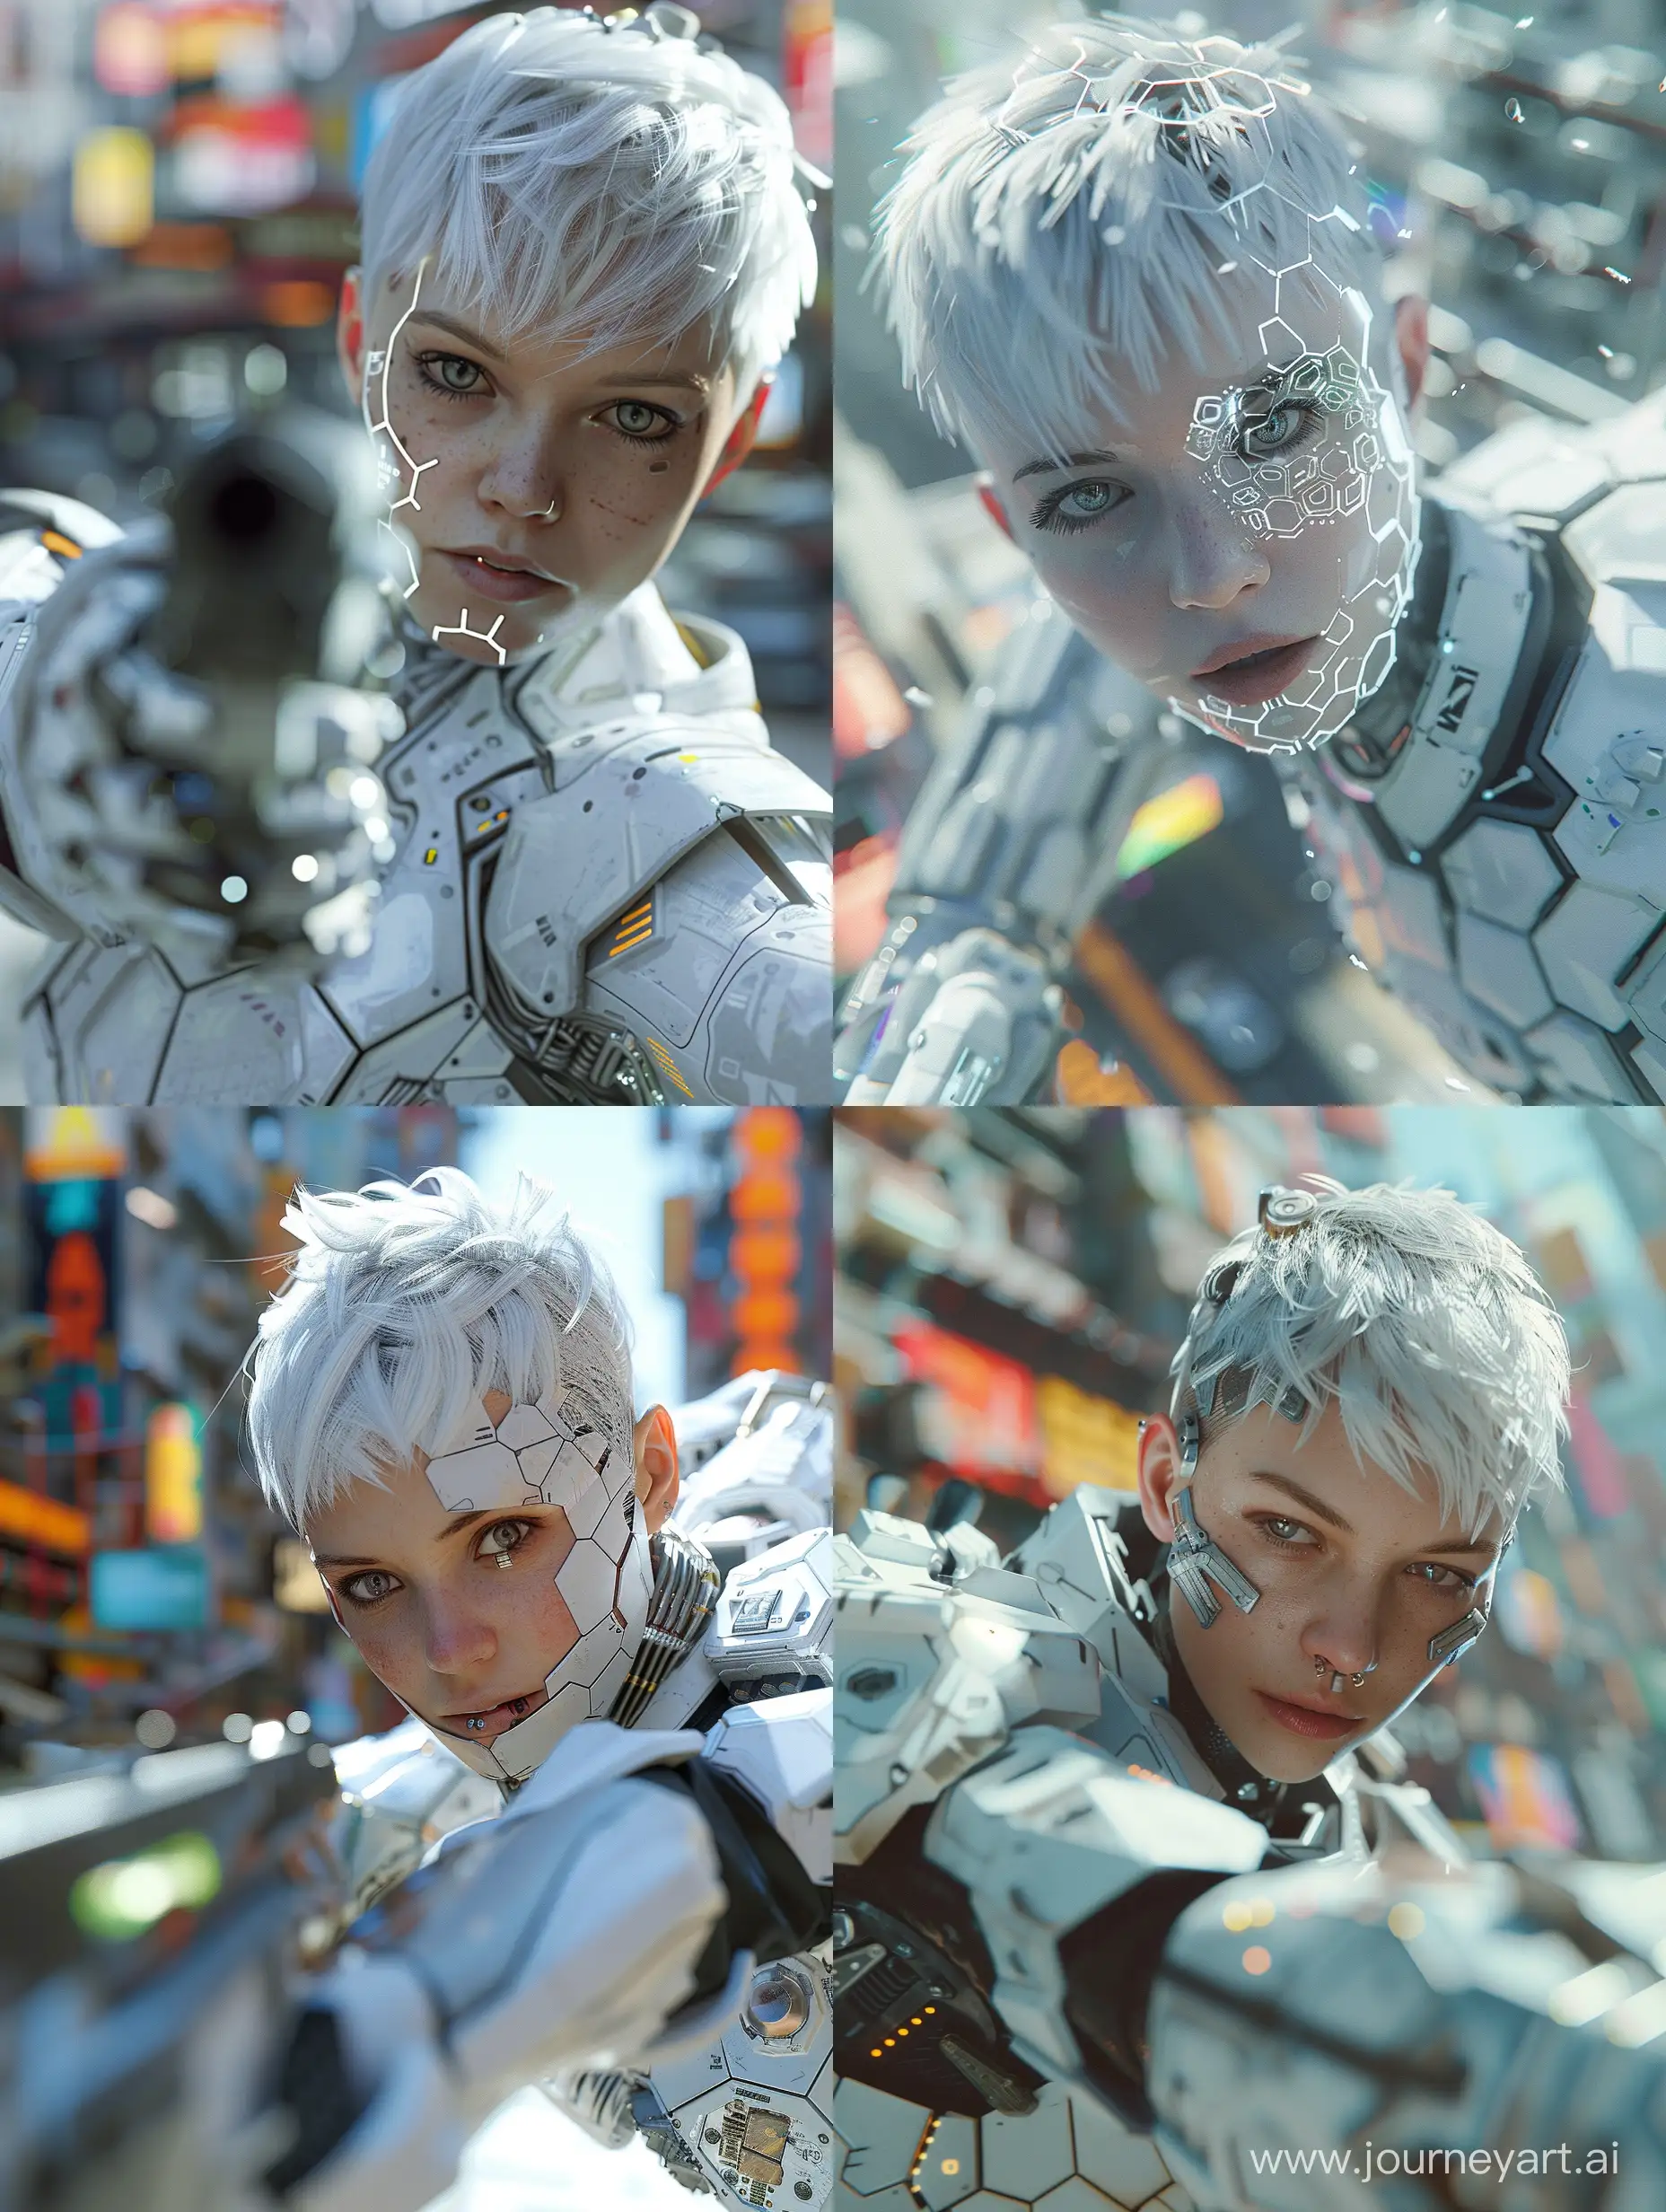 Frost-WhiteHaired-Cyberpunk-Female-in-Hexagonal-Armor-Aiming-at-Viewer